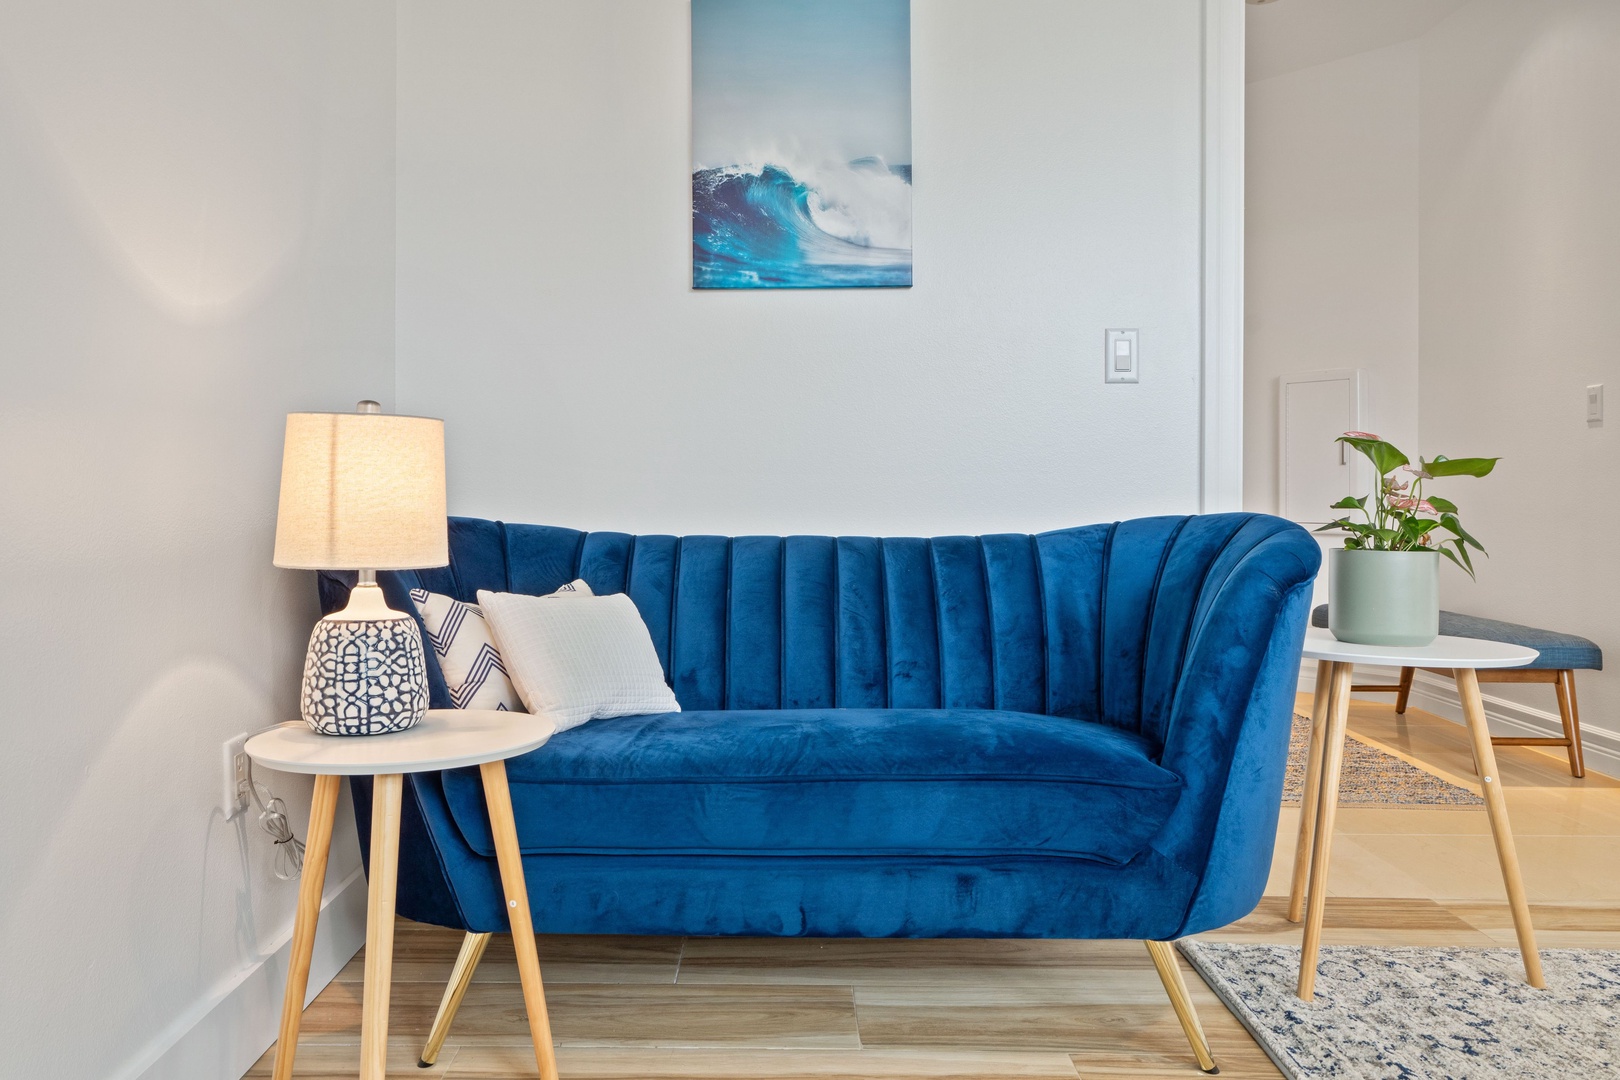 Princeville Vacation Rentals, Tropical Elegance - Vibrant blue couch corner; your cozy retreat with island vibes.